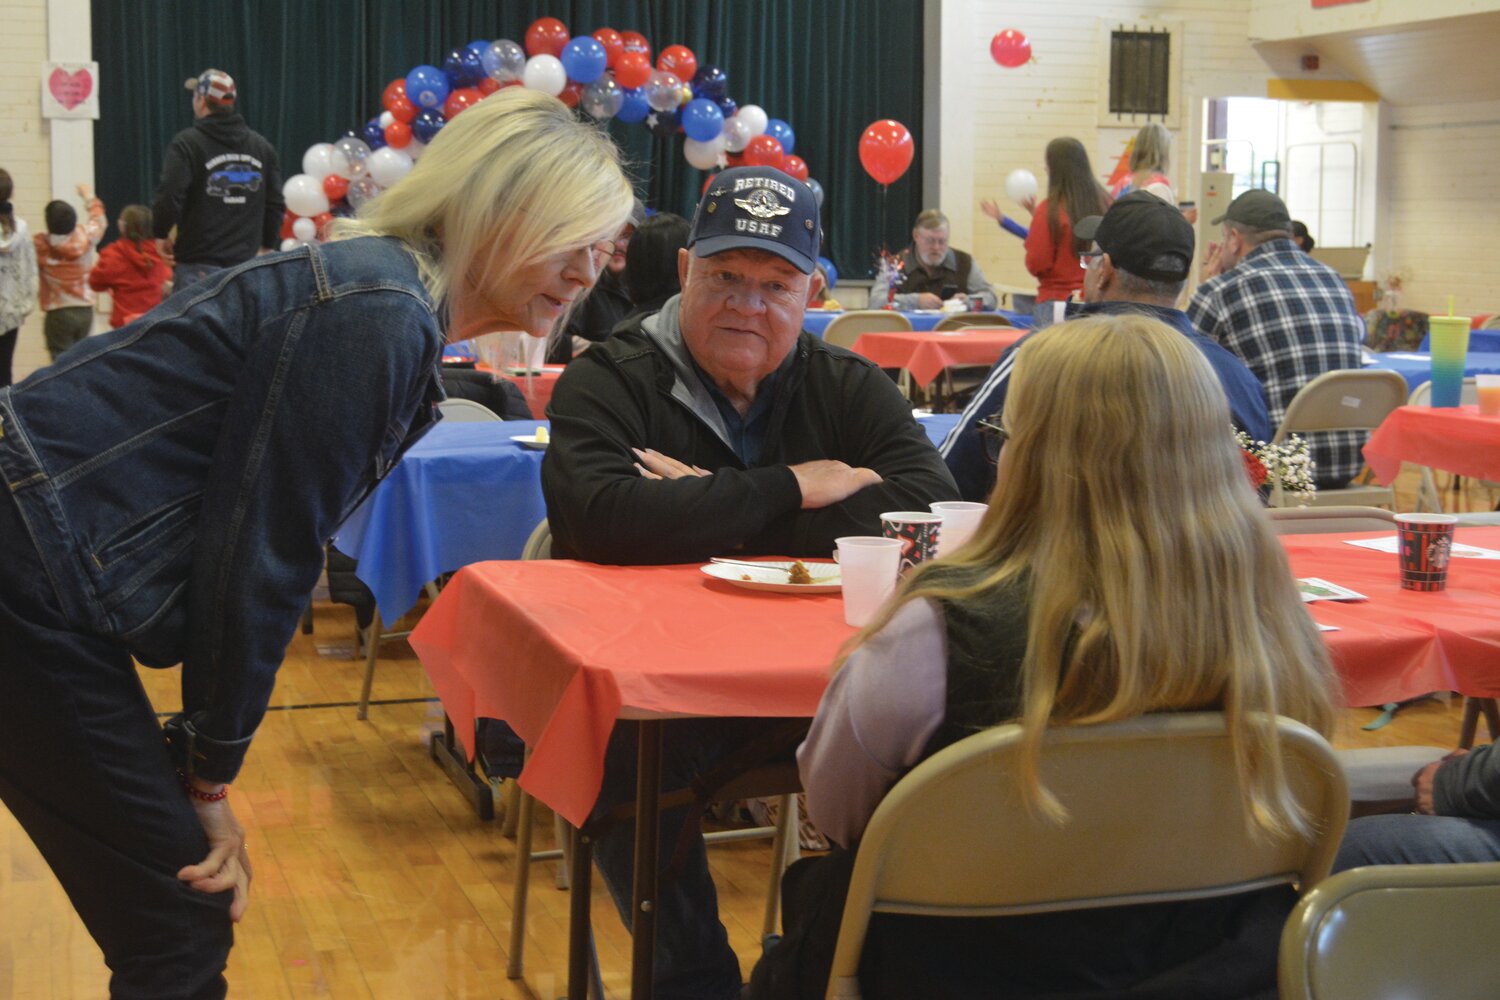 A retired member of the United States Air Force enjoys breakfast at Roy Elementary School on Nov. 9.